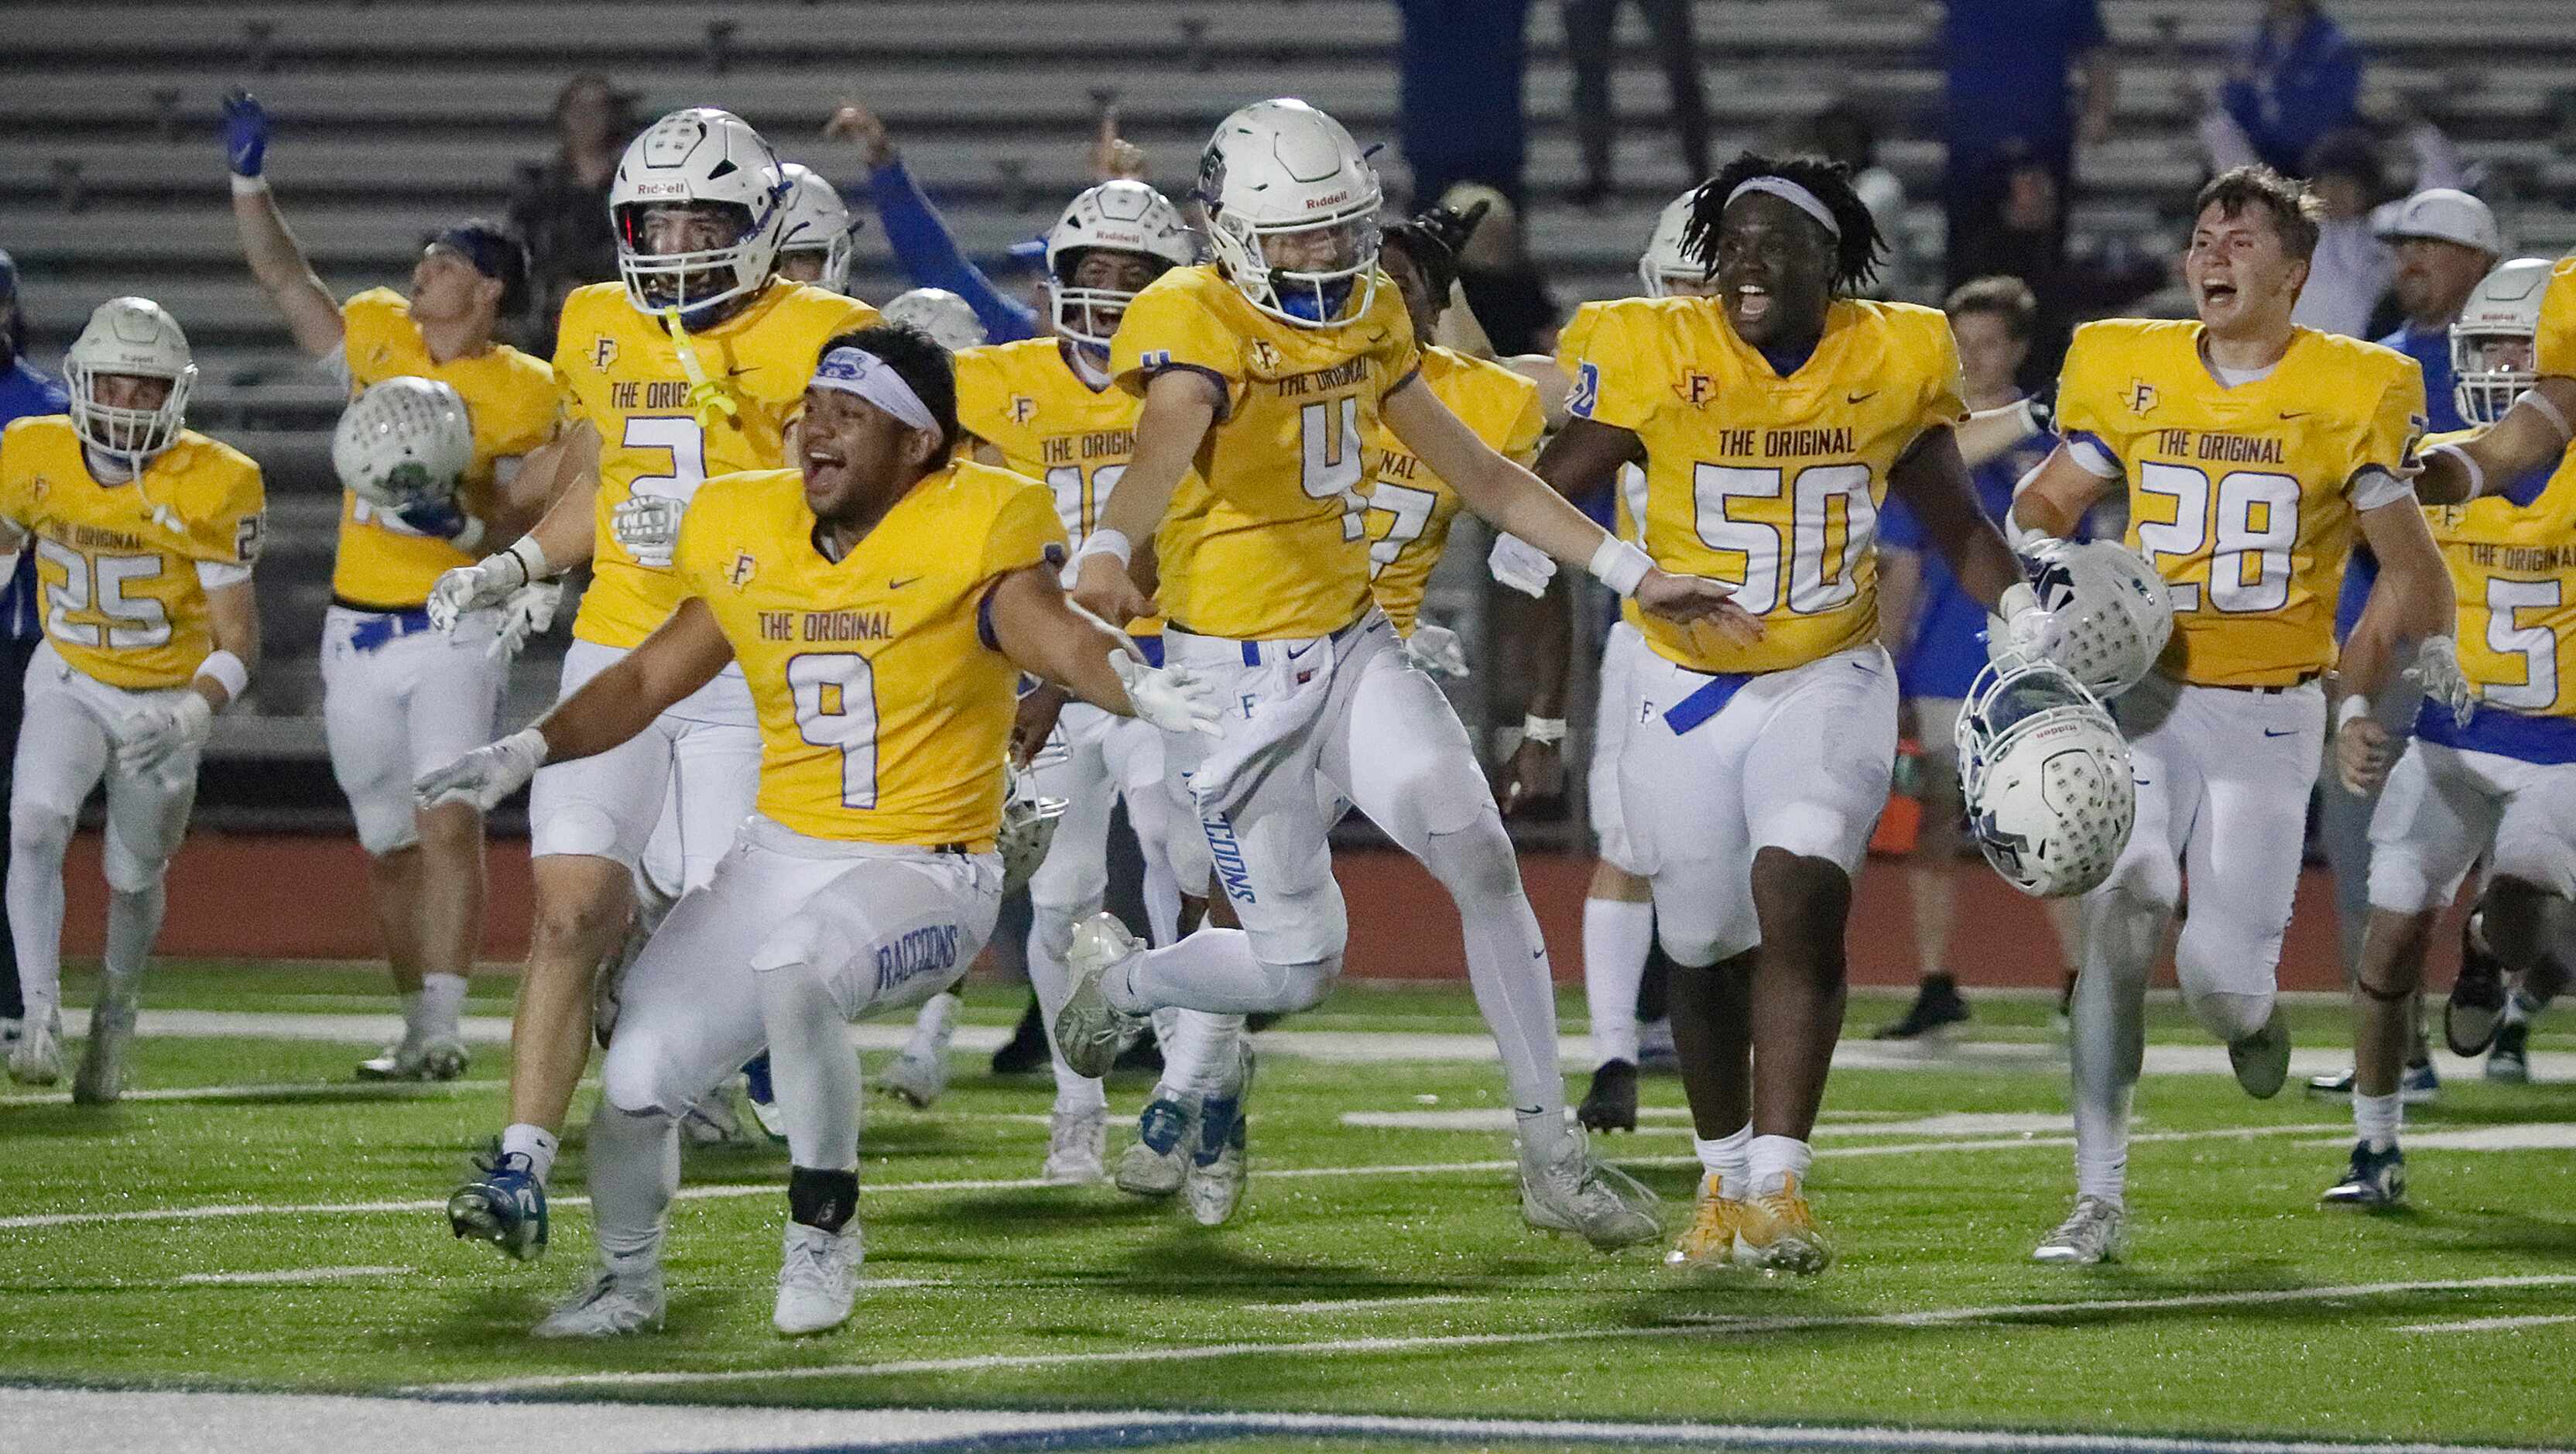 Frisco High School storms the field after making a field goal  for overtime win as they...